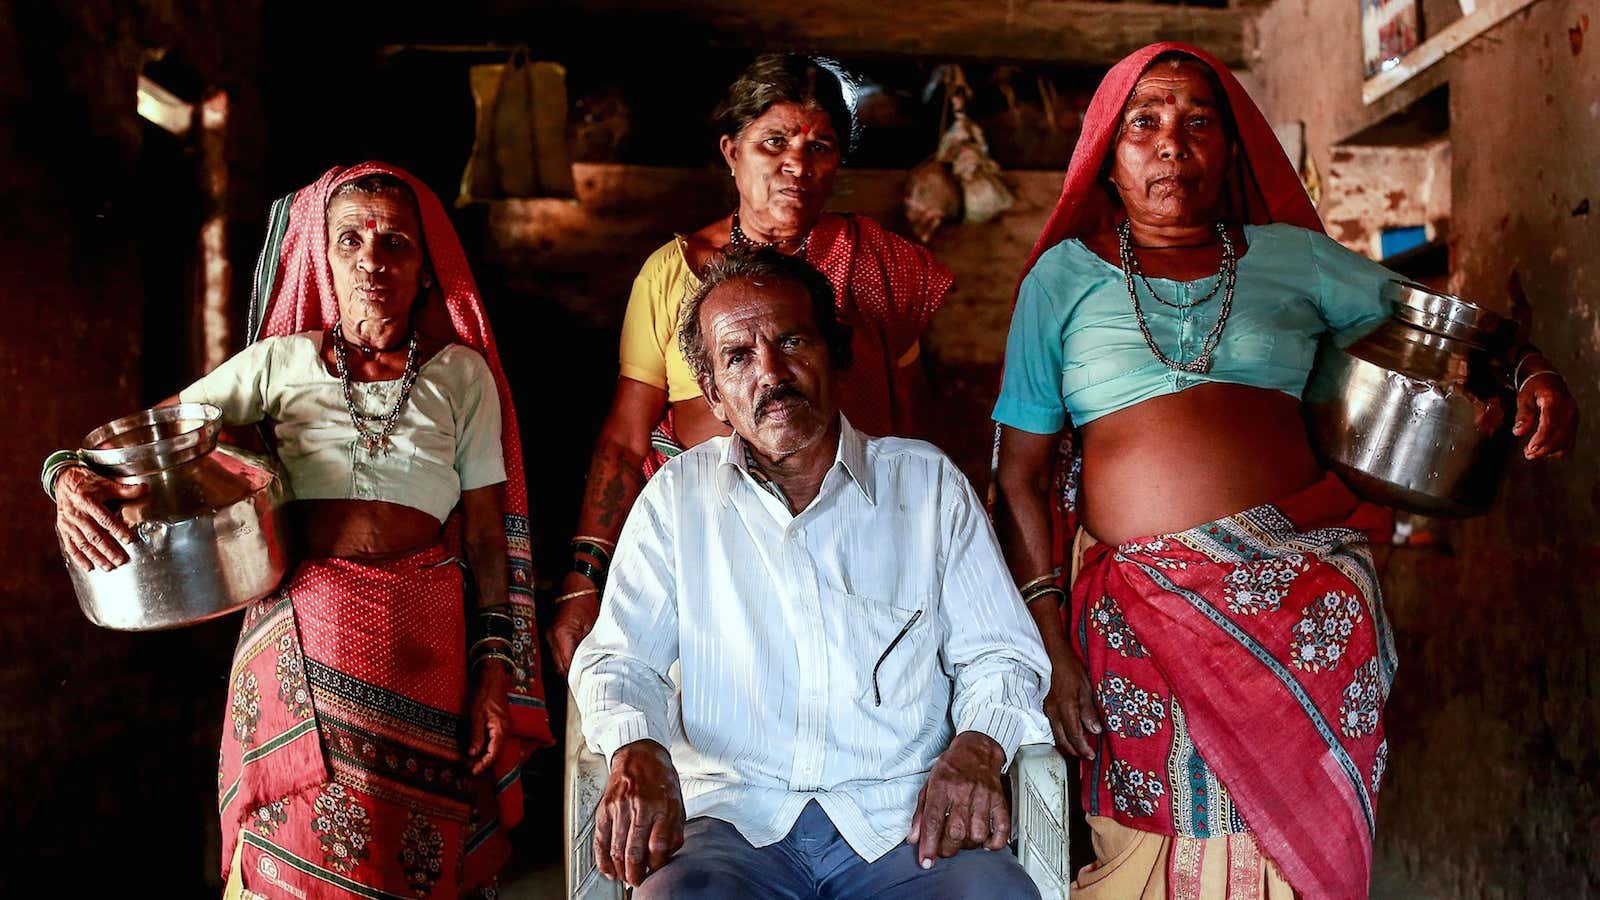 Sakharam Bhagat, 66, poses with his wives.